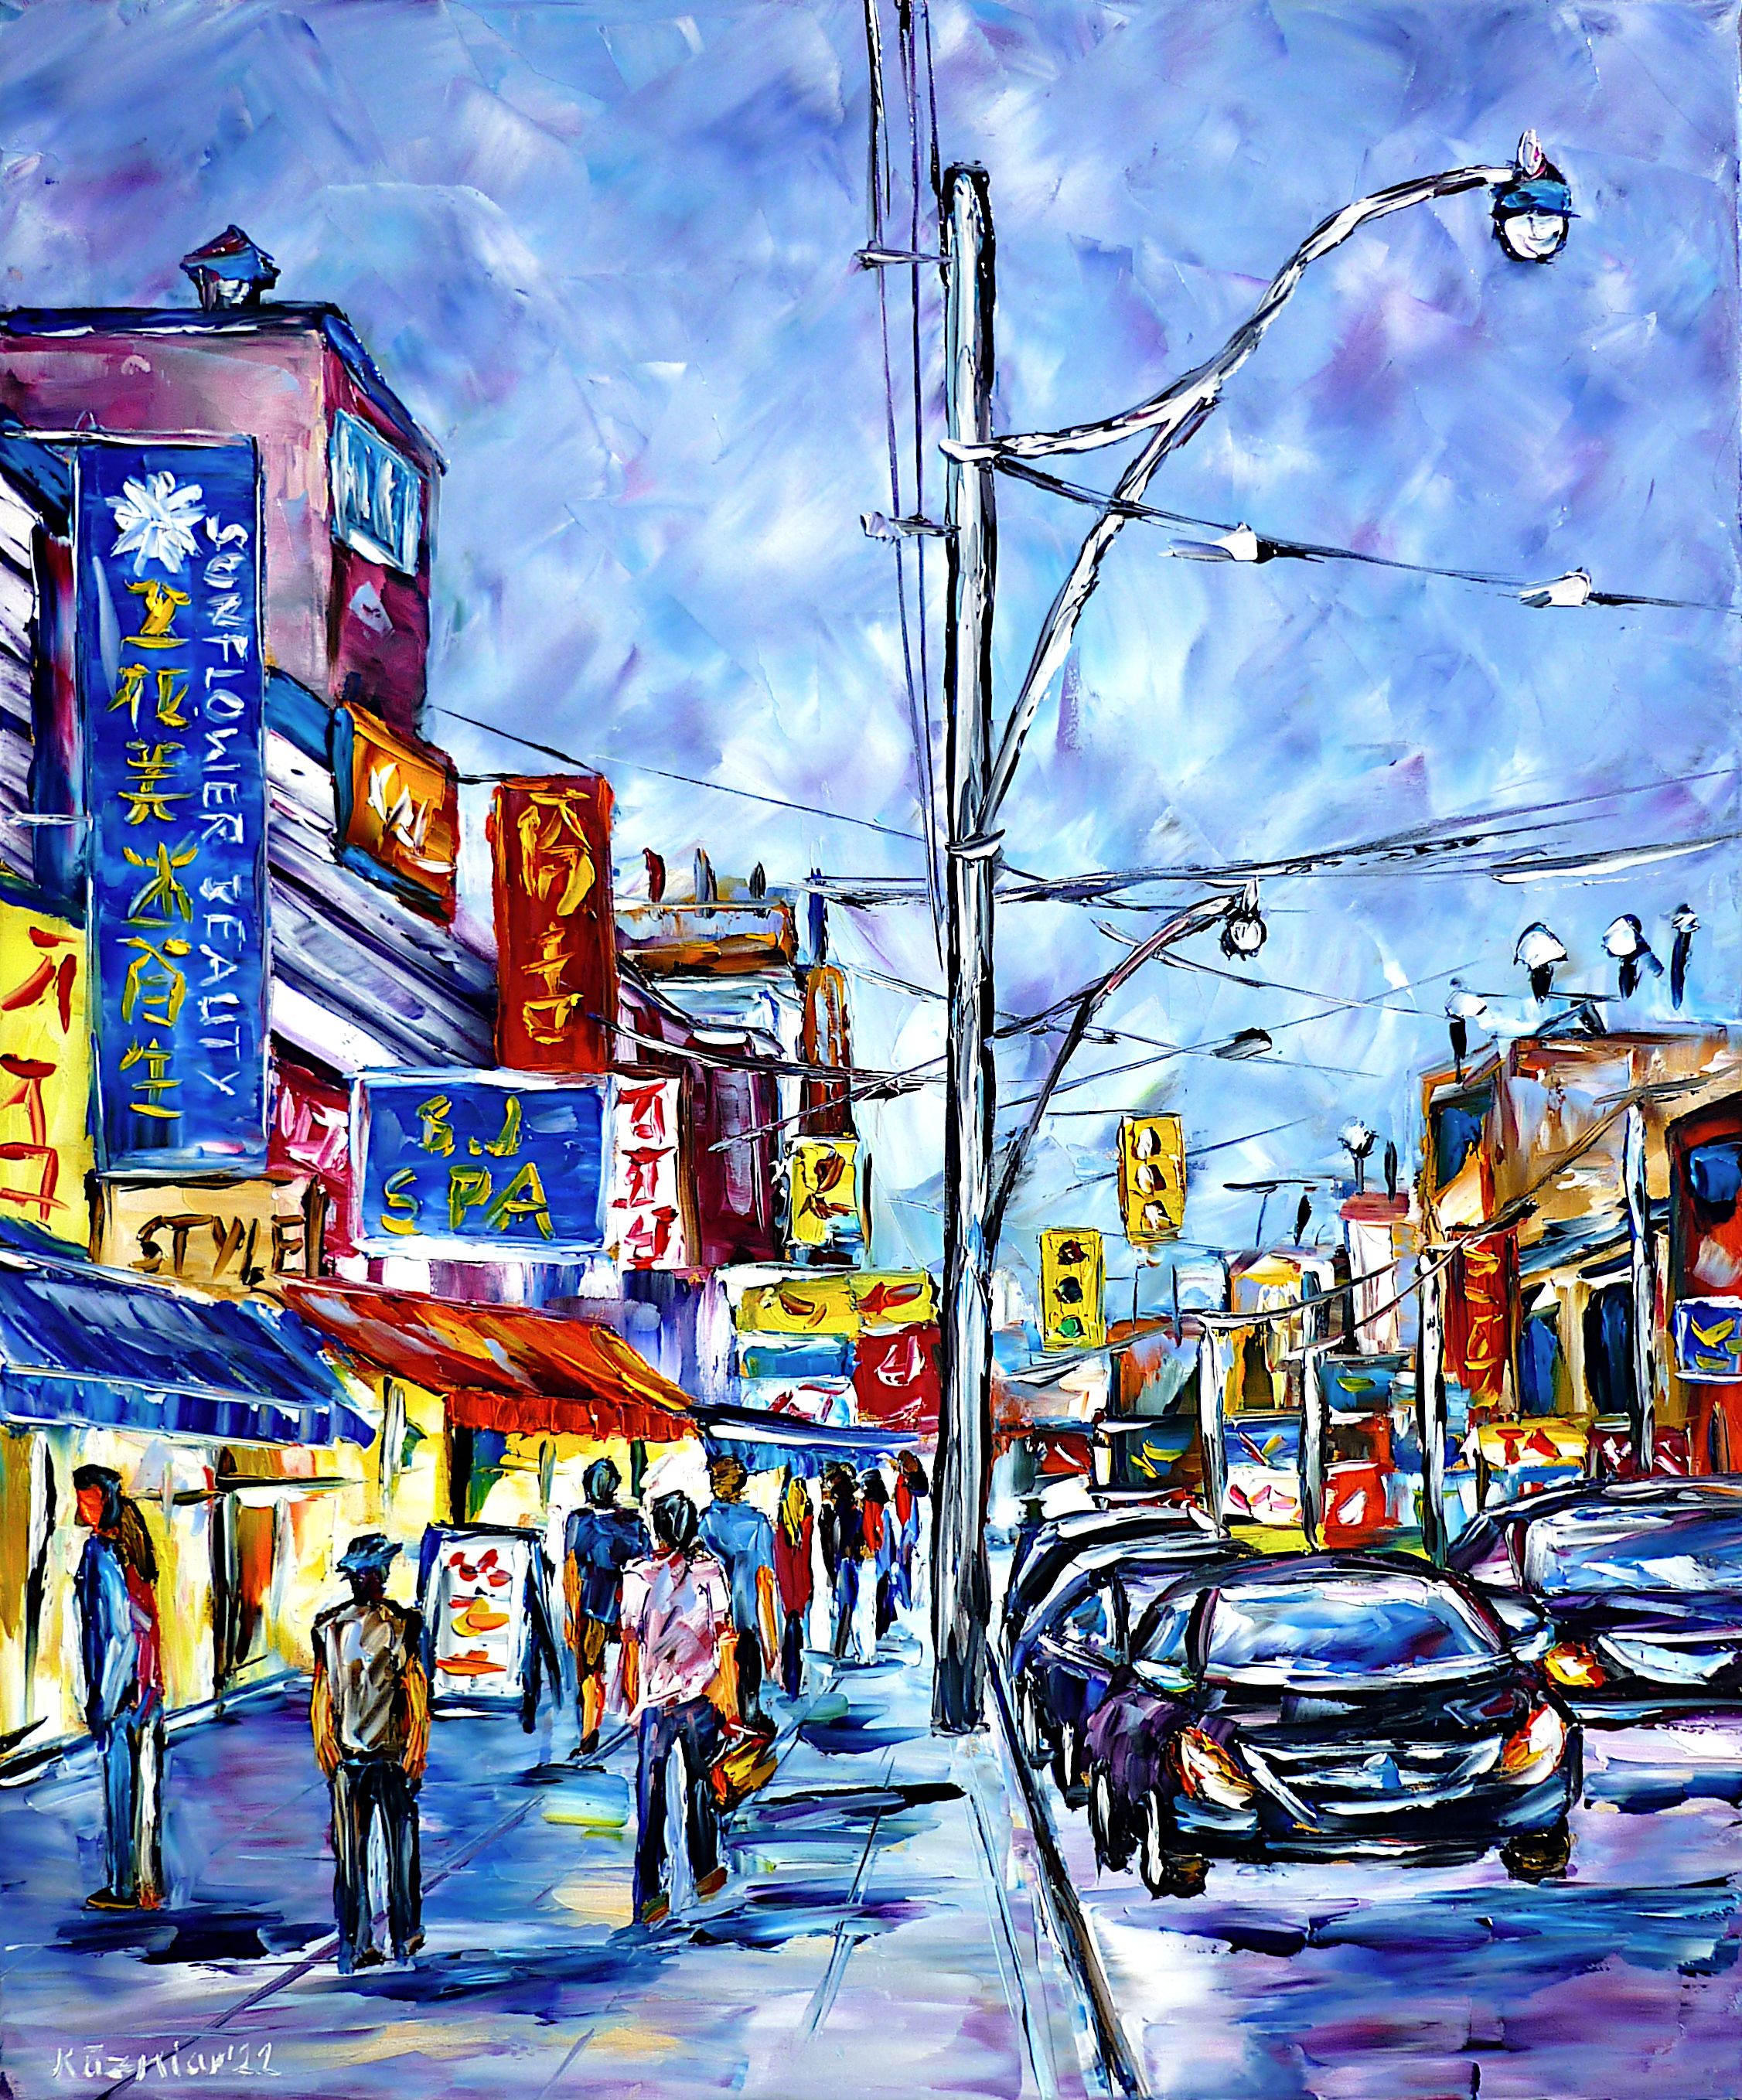 toronto street light,toronto lanterns,city stroll,people in front of storefronts,people in front of shopwindows,standing in front of storefronts,sky over toronto,toronto cars,signage,busy city,city walk,in the streets of toronto,chinatown streets,city power lines,hanging power cords,toronto cityscape,toronto city scene,toronto painting,toronto picture,chinatown city scene,toronto street traffic,pedestrians,toronto streetscape,chinatown street scene,colorful city,canada painting,toronto houses and buildings,city life,city people,toronto love,toronto lovers,toronto cityscape,canada love,canada lovers,palette knife oil painting,modern art,impressionism,expressionism,abstract painting,lively colors,colorful painting,bright colors,light reflections,impasto painting,figurative